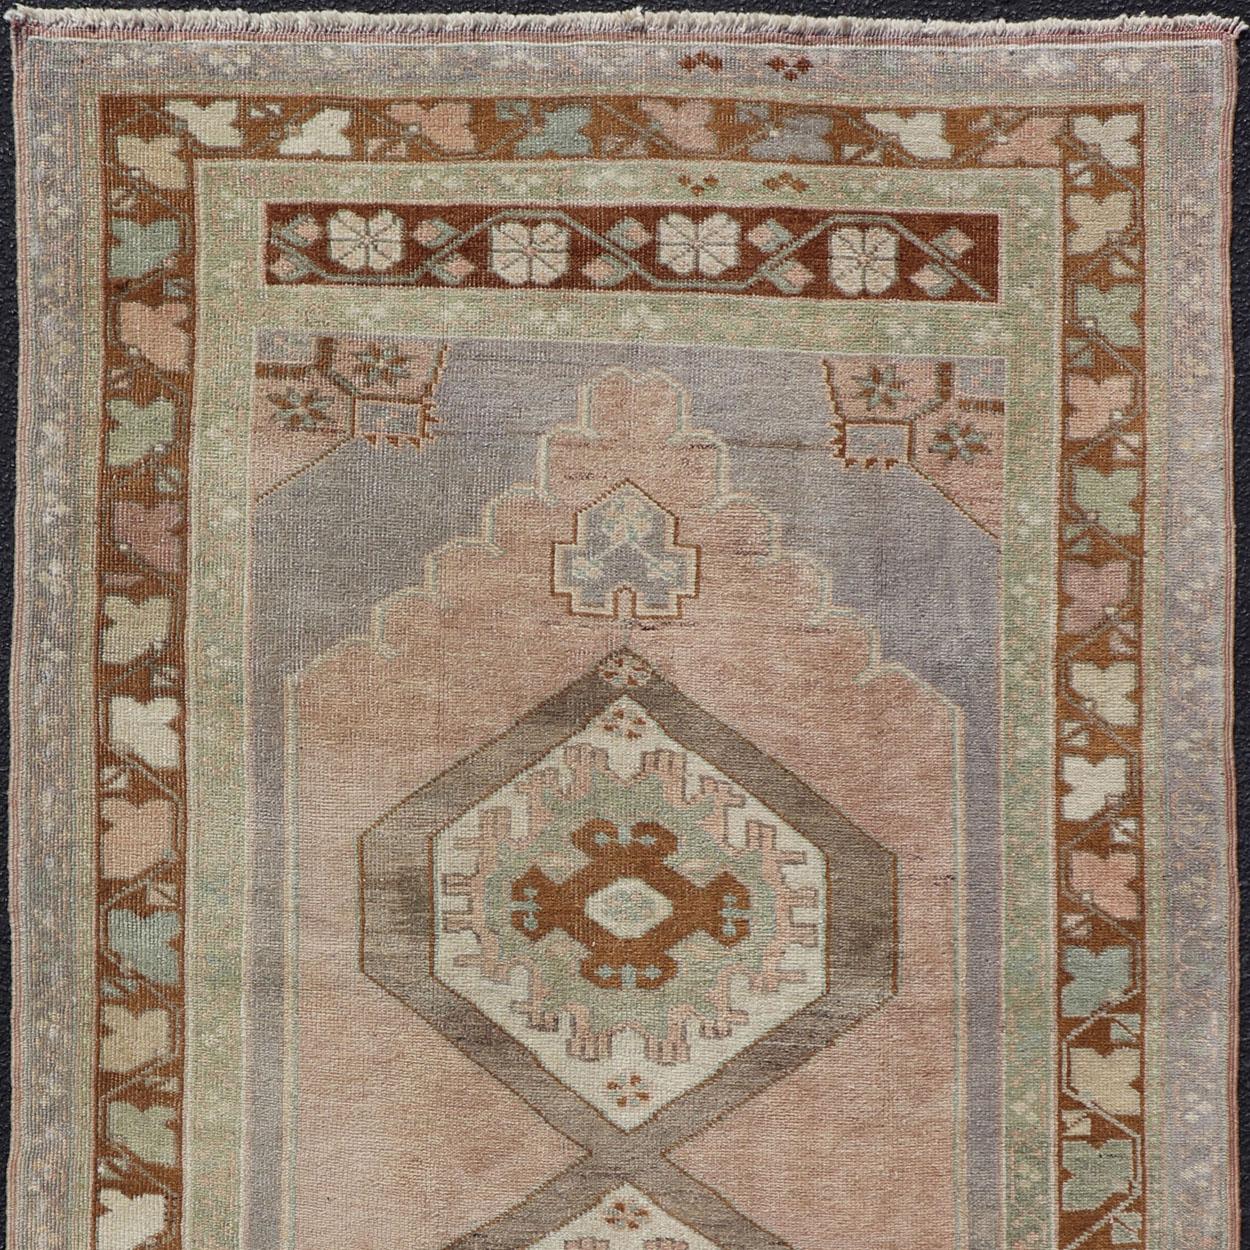 Midcentury Turkish Oushak rug with diamond medallions in lavender, pink, brown, cream and blue rug TU-NED-1023, country of origin / type: Turkey / Oushak, circa 1950.

This beautiful vintage Oushak runner from 1950s Turkey features a geometric